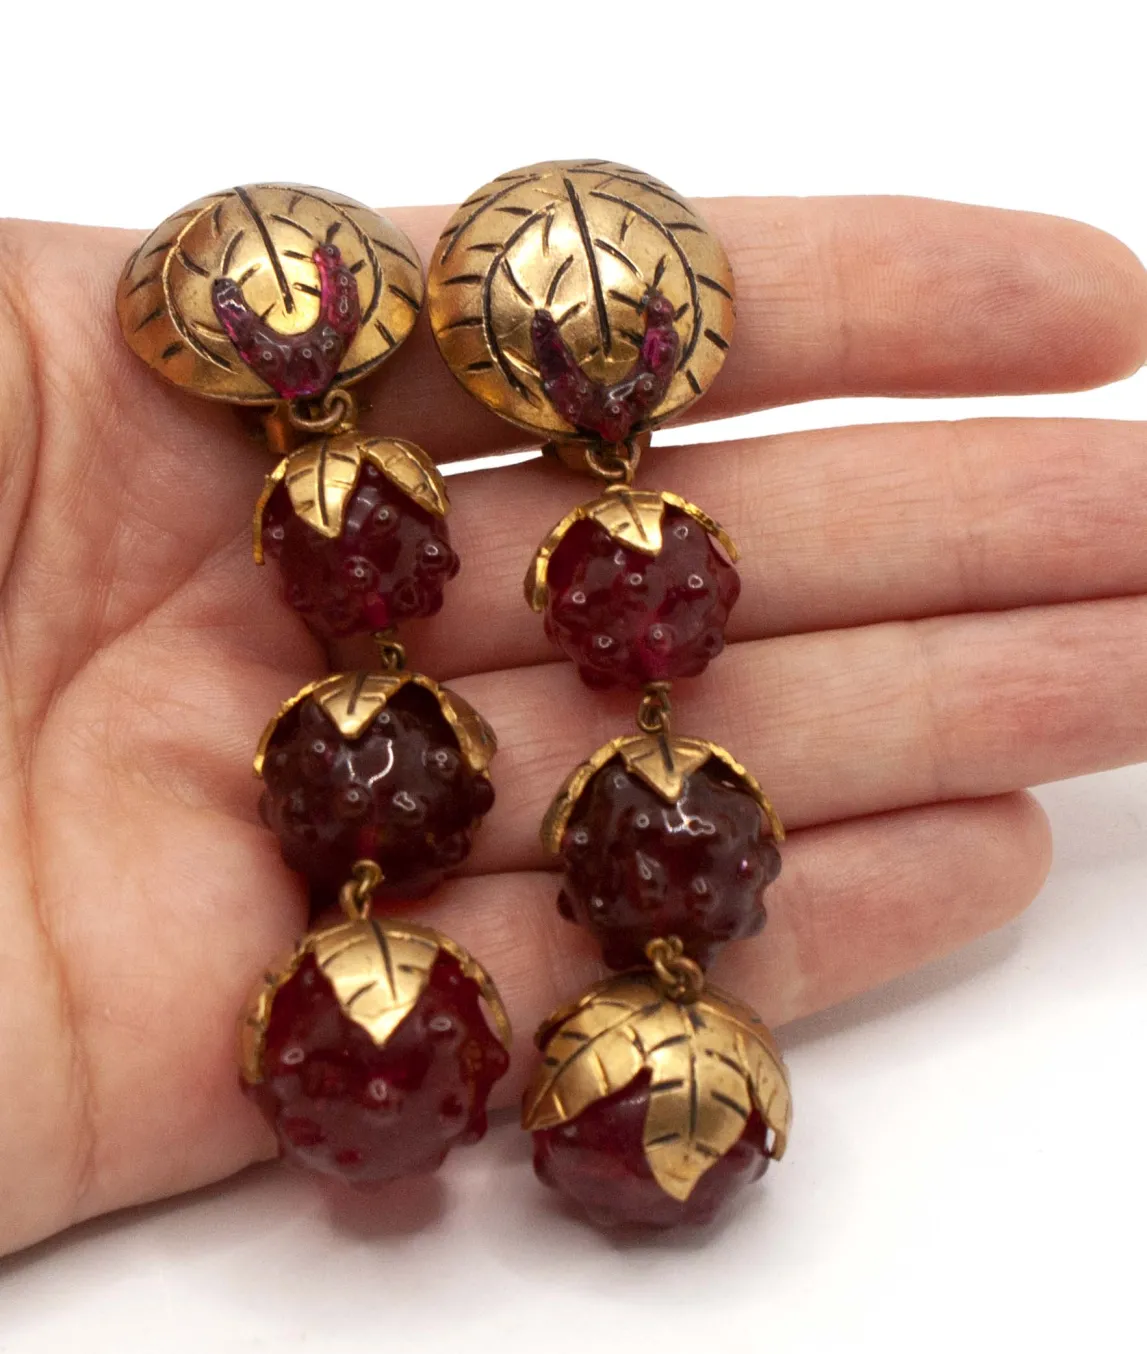 Long Isabel Canovas red and gold earrings